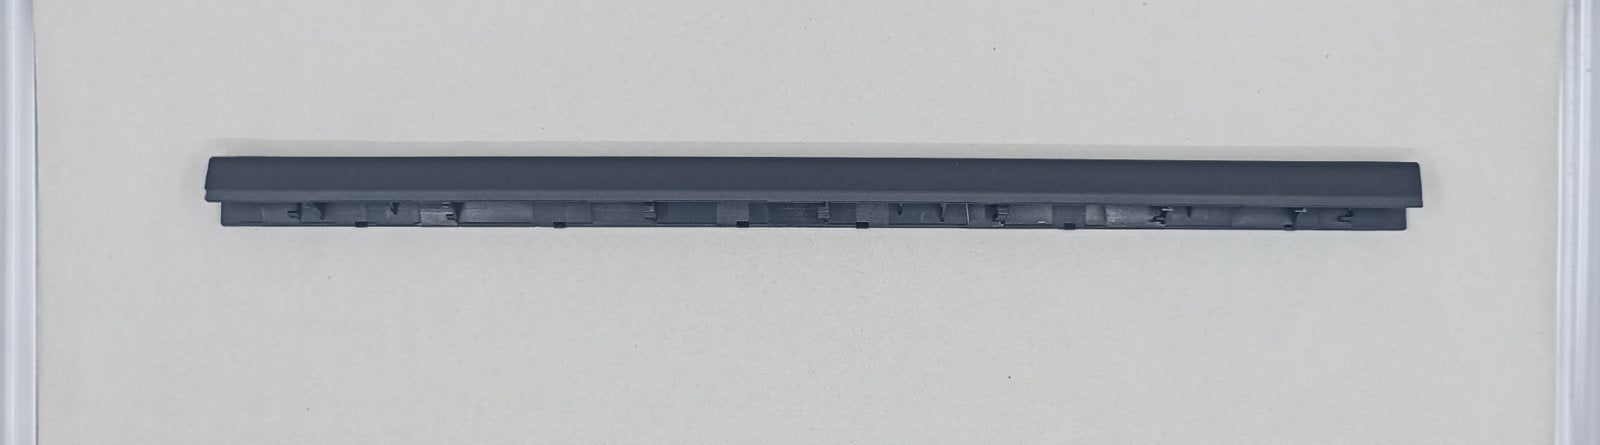 Replacement Hinge Cover for Lenovo 320-15IKB WL